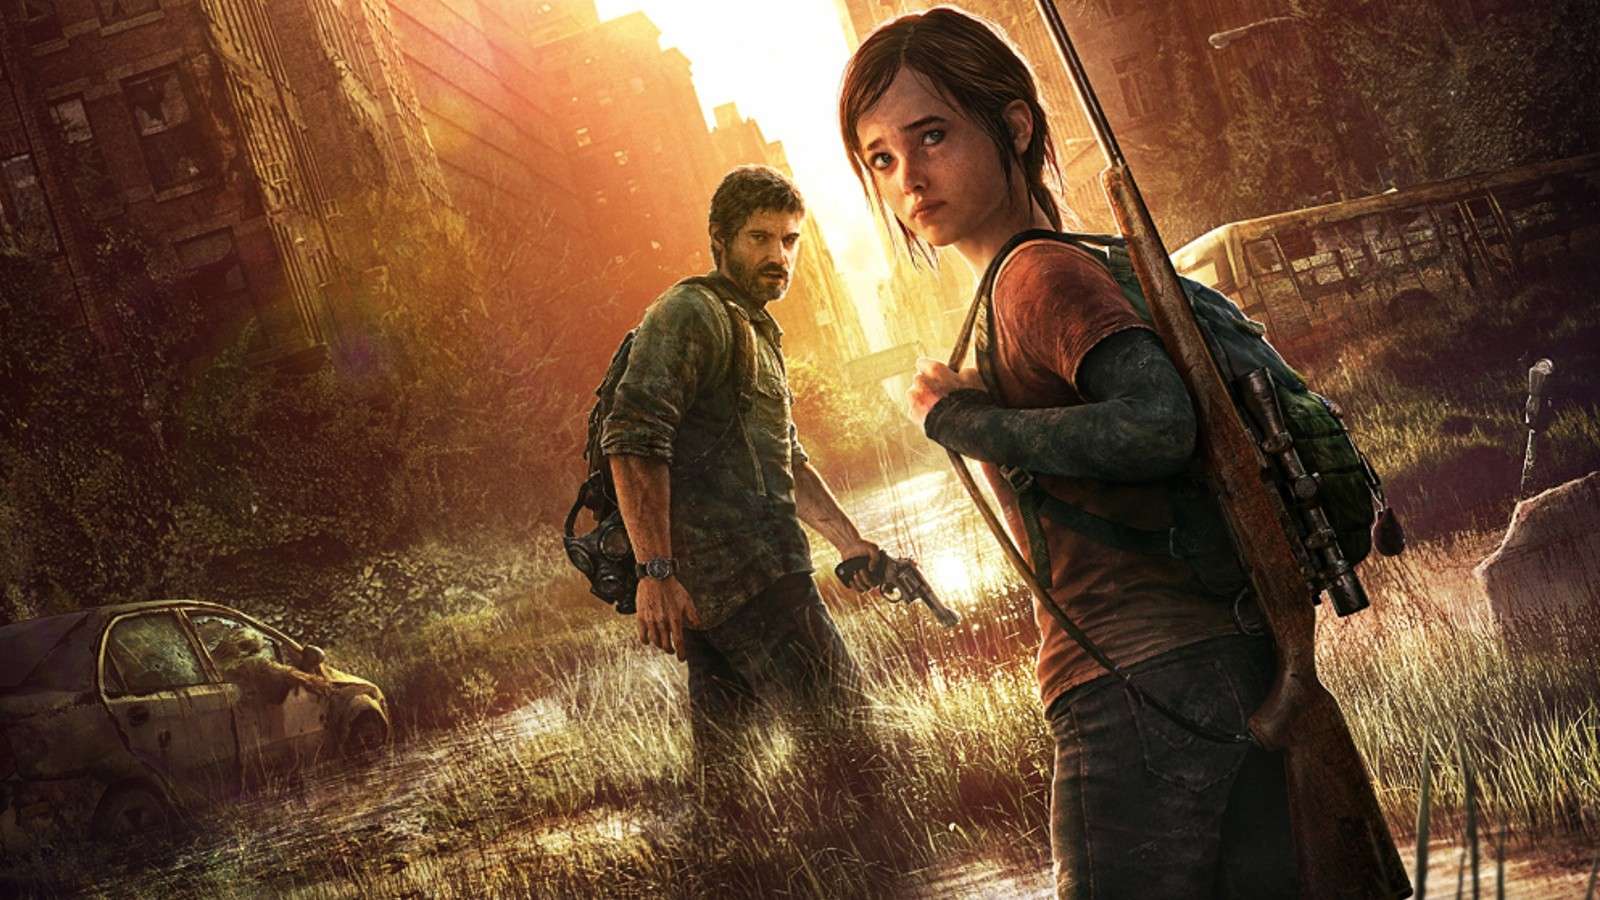 Official artwork from The Last of Us featuring Joel and Ellie.